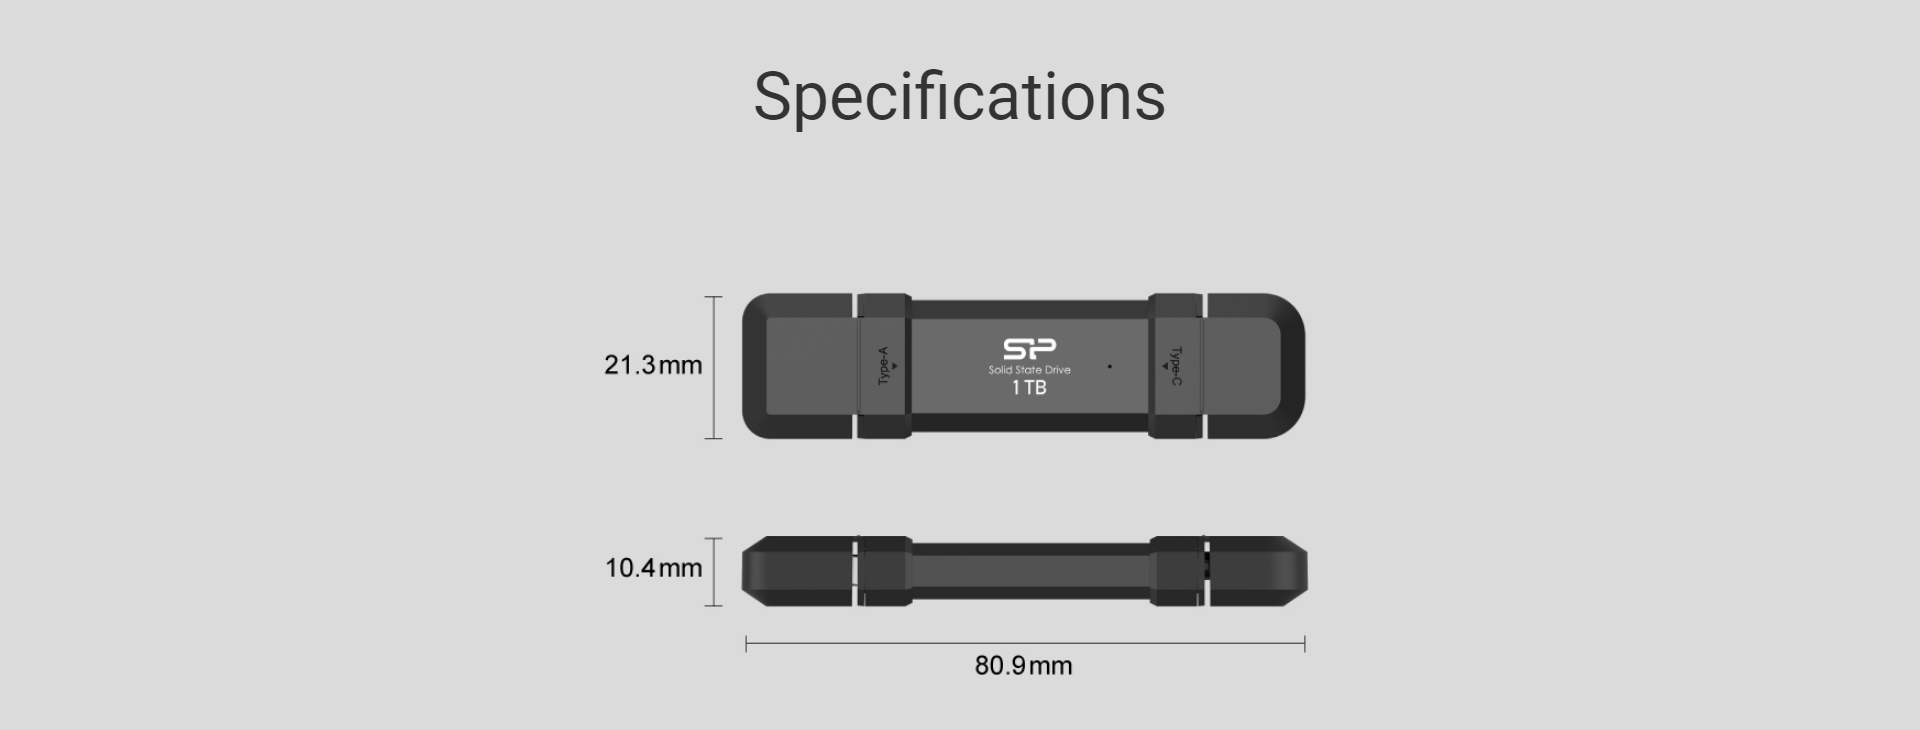 A large marketing image providing additional information about the product Silicon Power DS72 500GB USB Type C & A 3.2 Gen 2 SSD Flash Drive - Black - Additional alt info not provided